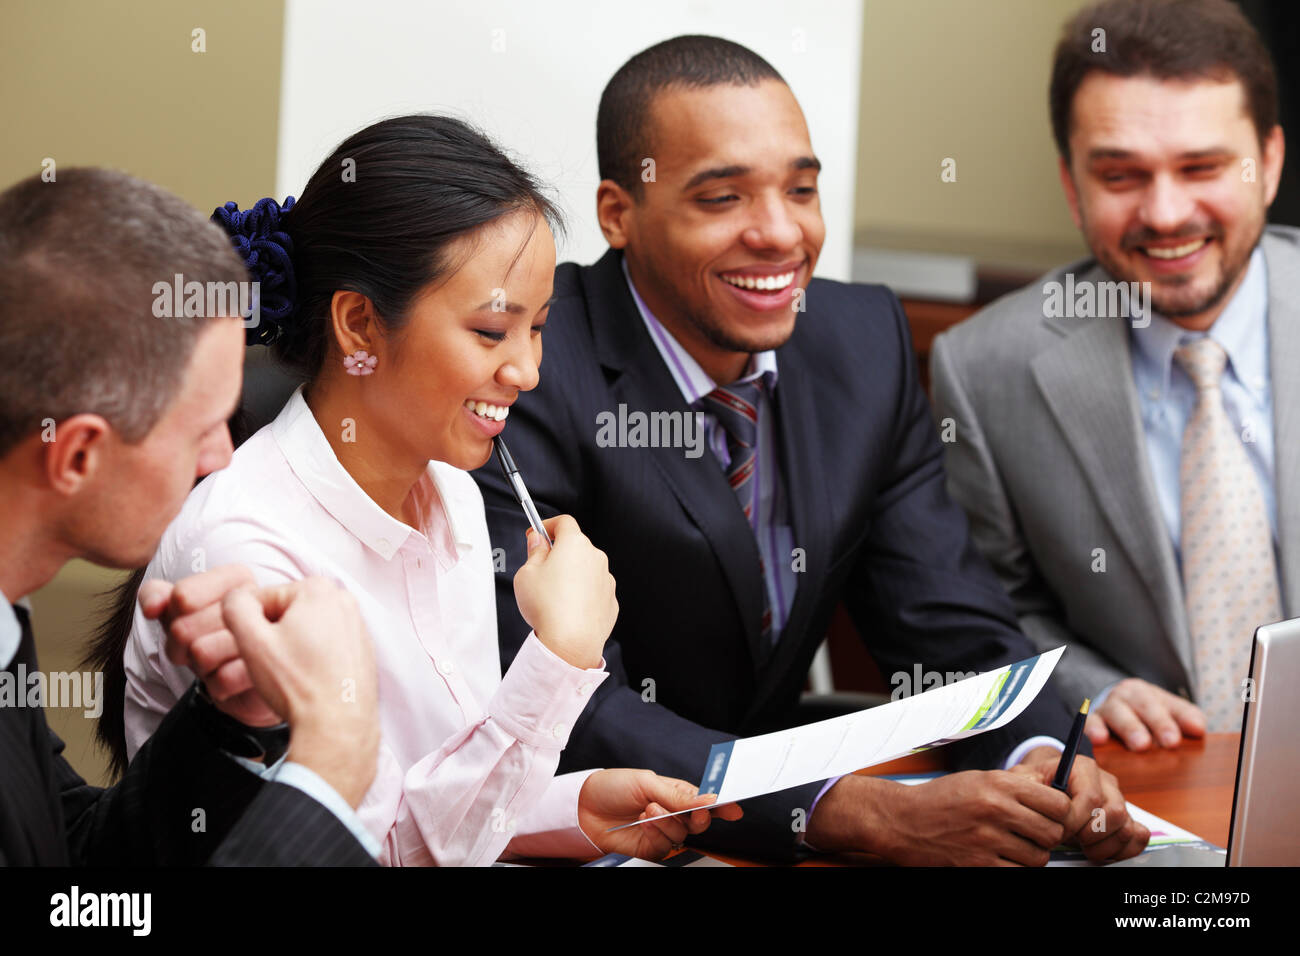 Multi ethnic business team at a meeting. Interacting. Focus on woman Stock Photo